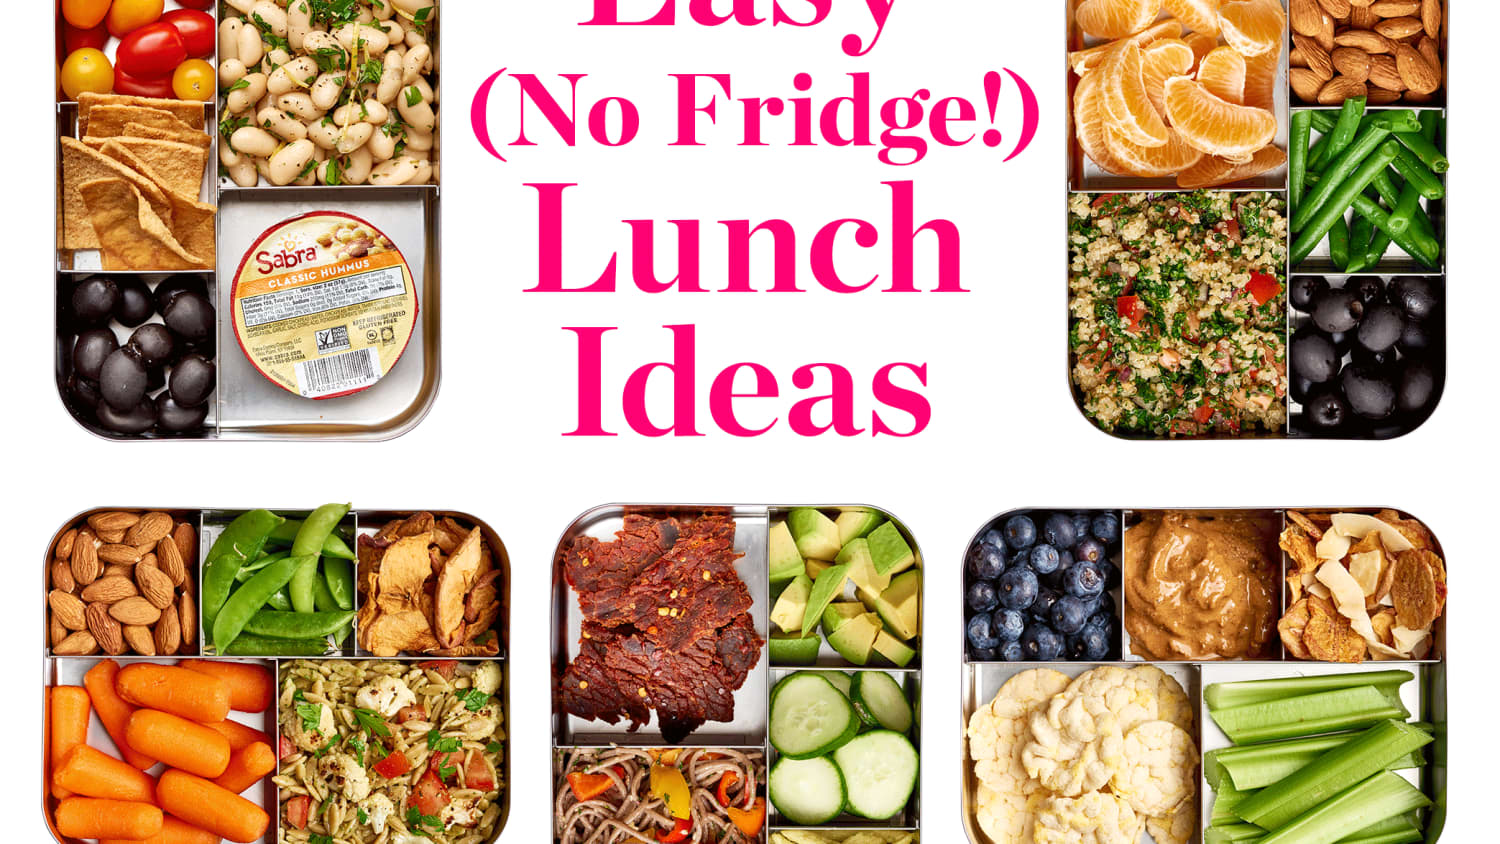 Healthy On the Go Packable Lunch Ideas